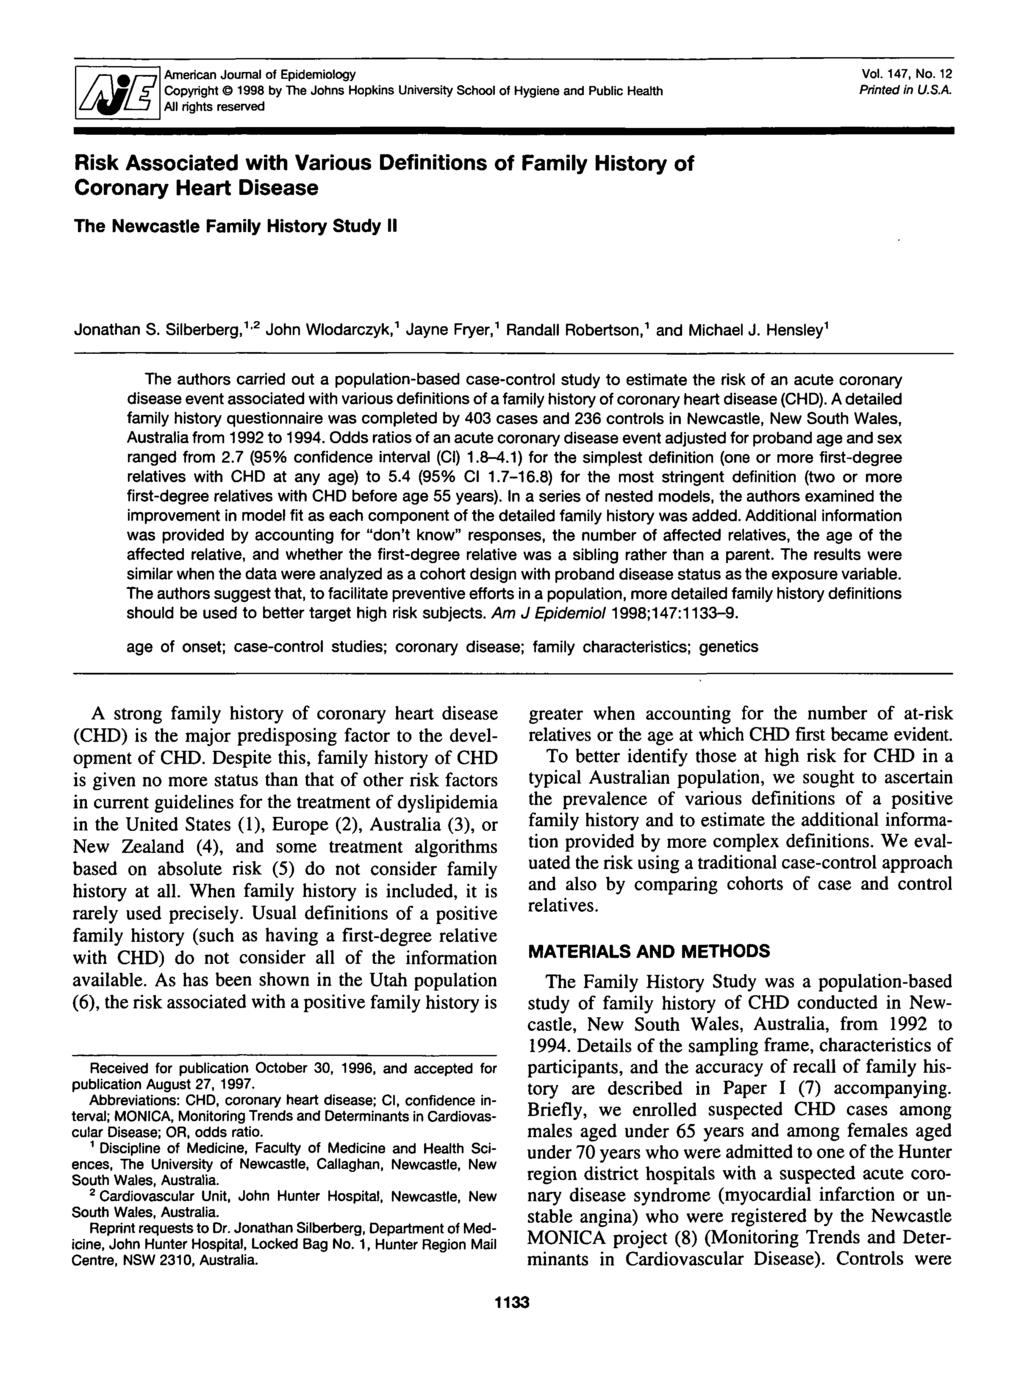 American Journal of Epidemiology Copyright 998 by The Johns Hopkins University School of Hygiene and Public Health All rights reserved Vol. 47, No. 2 Printed in U.S.A. Risk Associated with Various Definitions of Family History of Coronary Heart Disease The Newcastle Family History Study II Jonathan S.